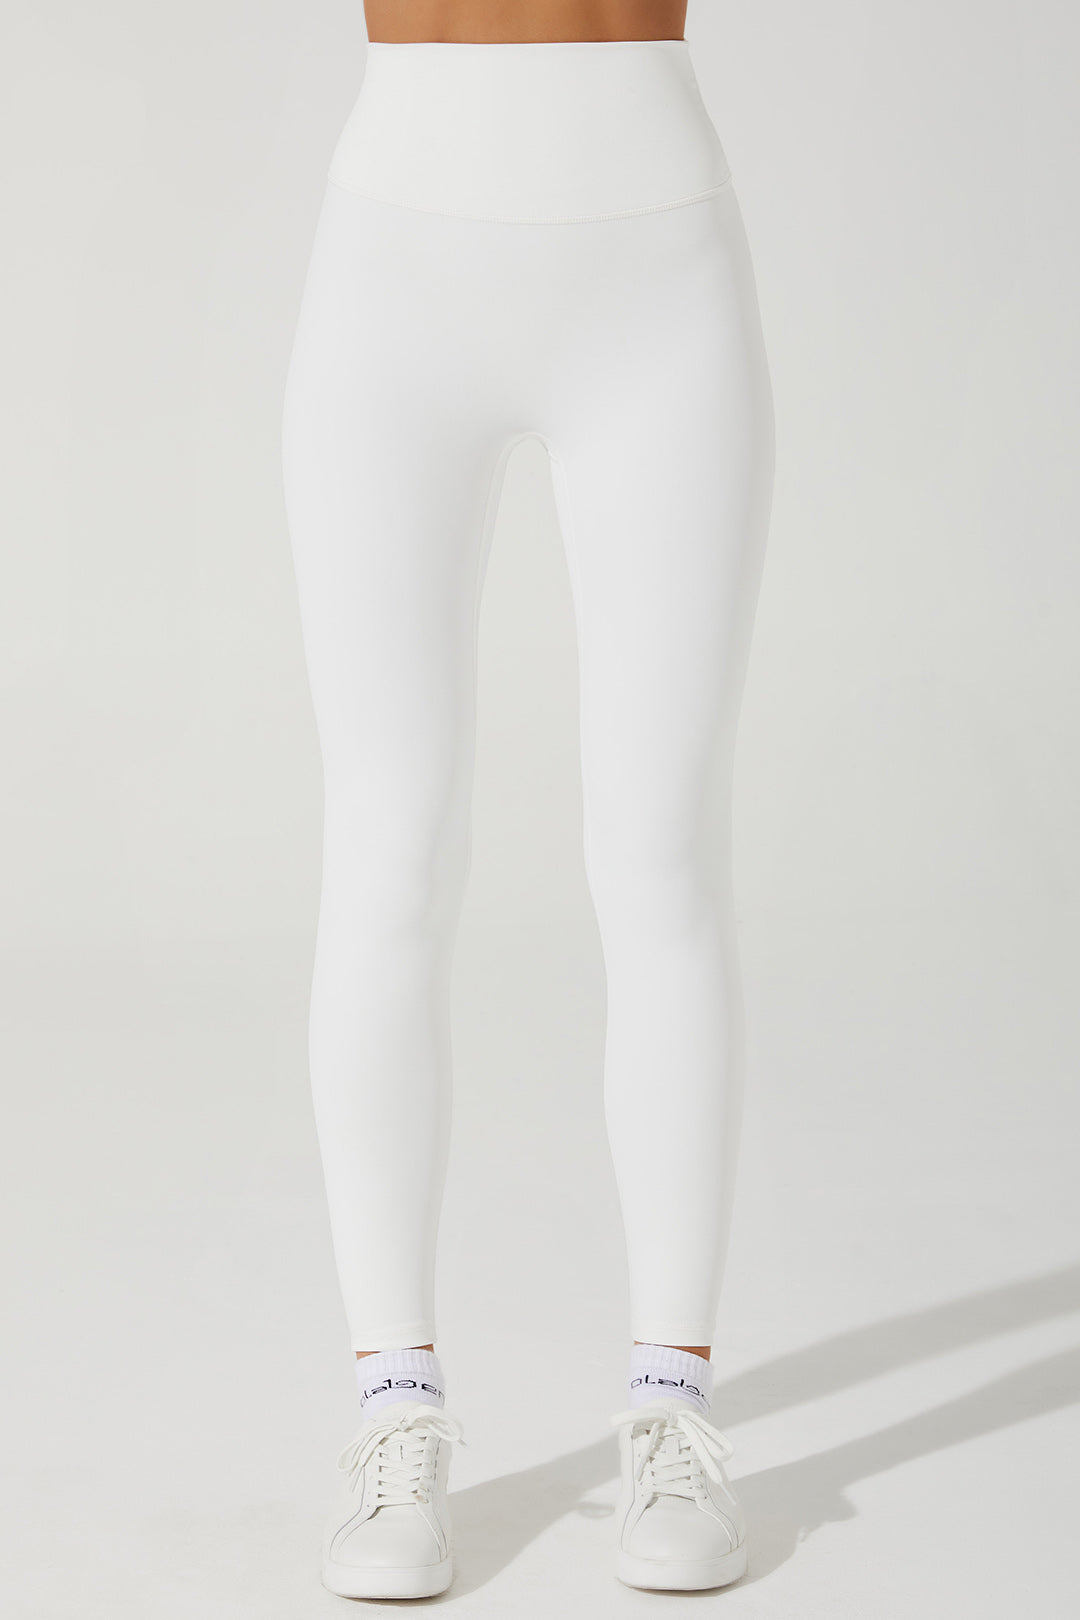 White women's leggings with a stylish design - perfect for any casual or active outfit.